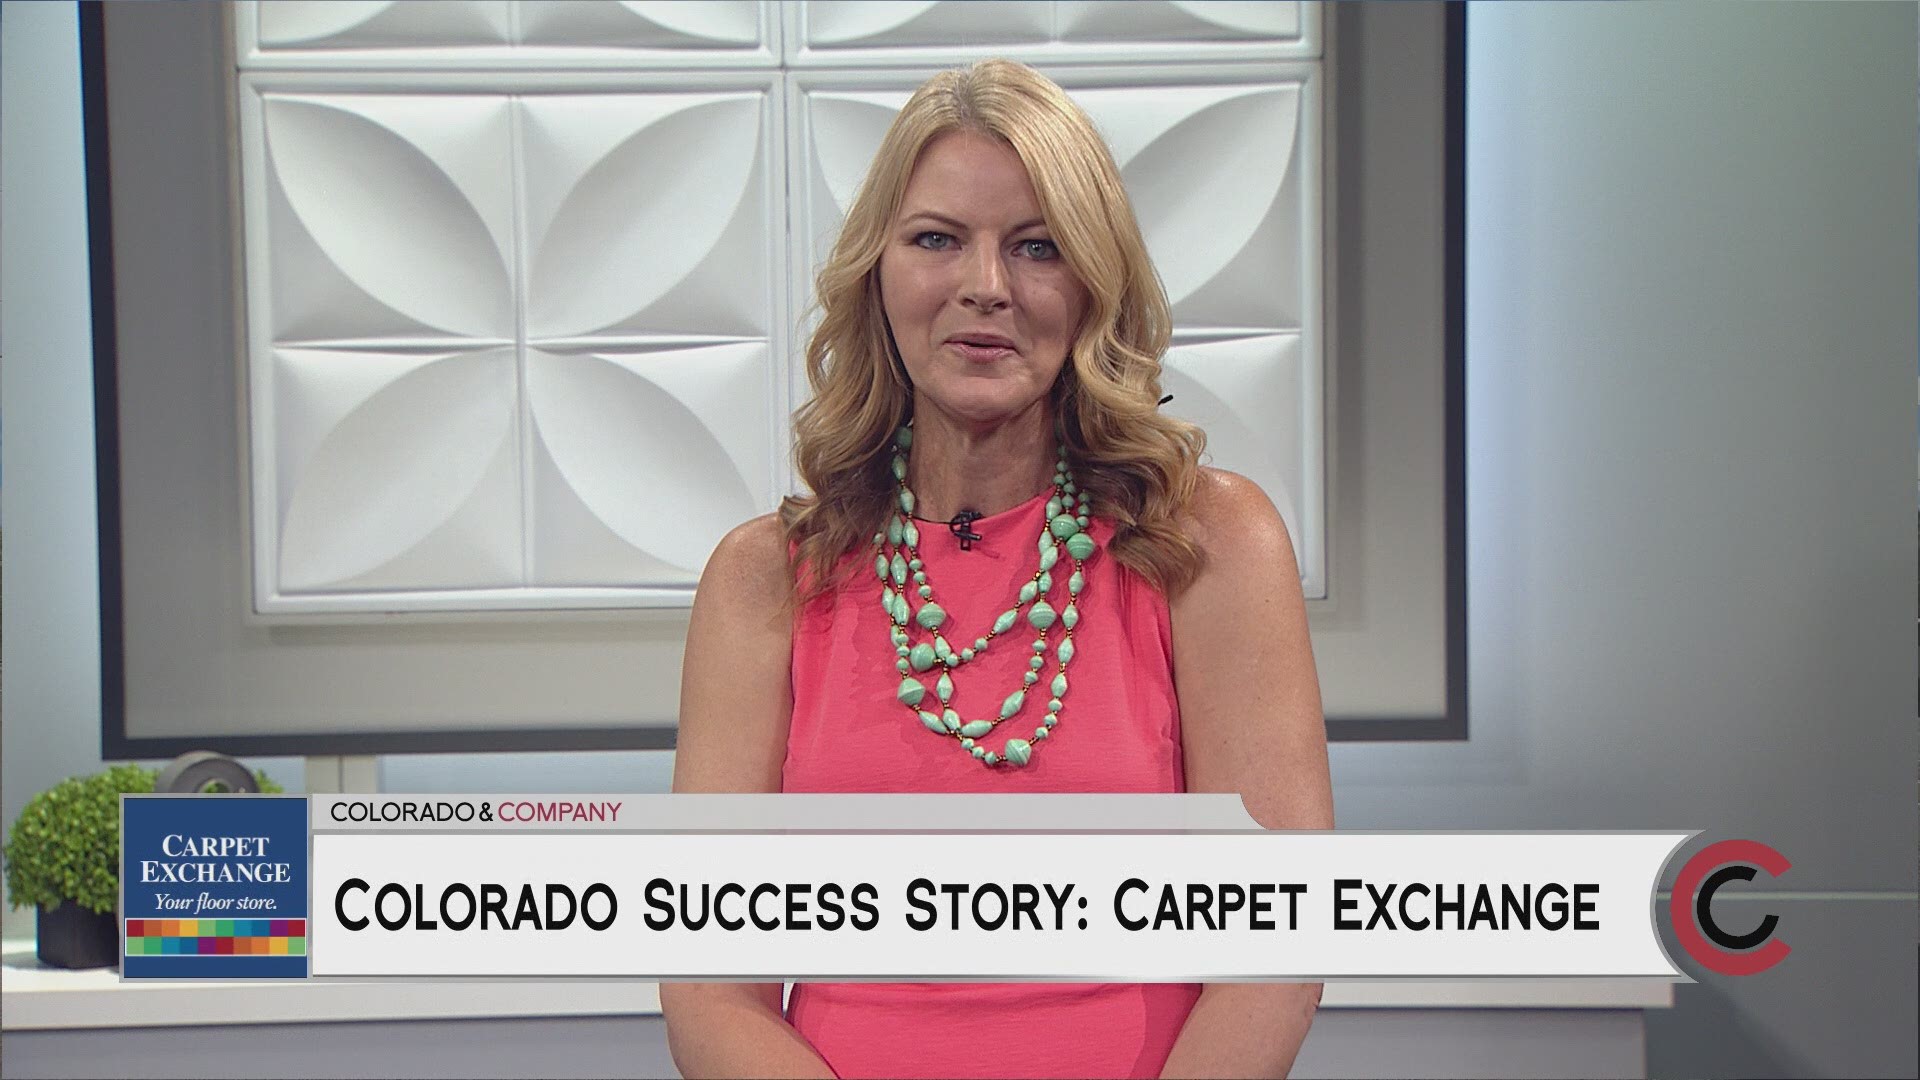 Carpet Exchange is a Colorado Success Story. Stop by a showroom near you this weekend. Learn more at www.CarpetExchange.com.